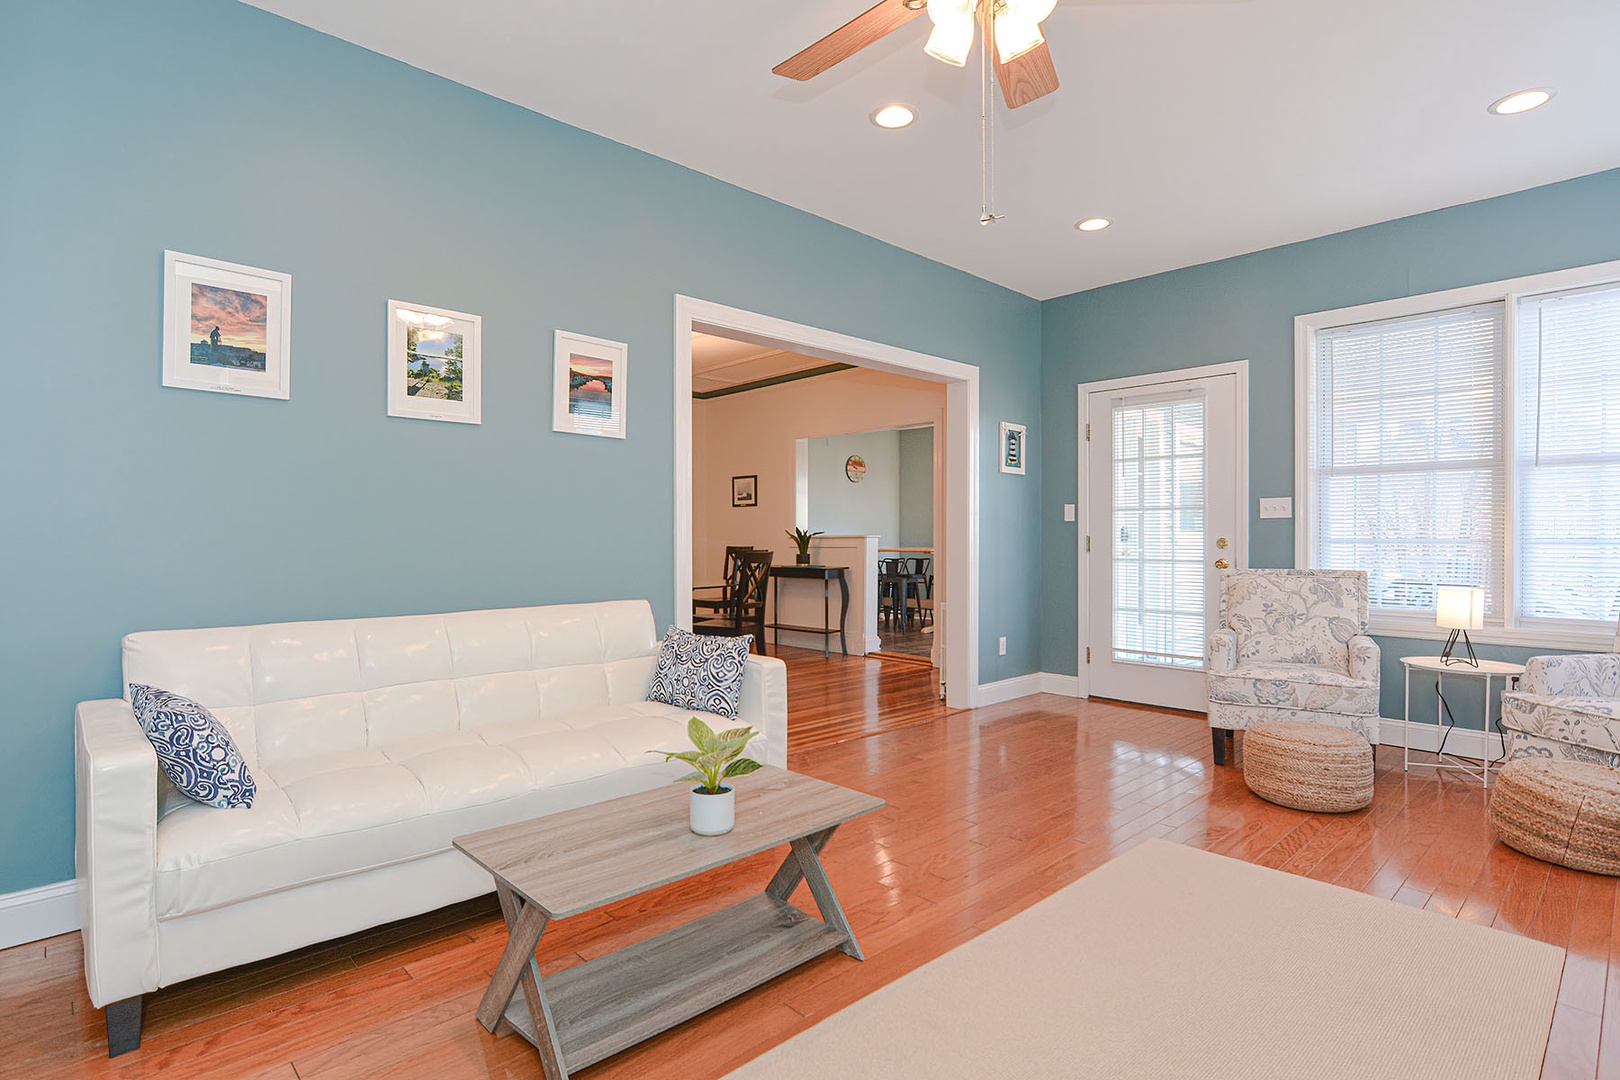 The home is decorated in soothing coastal hues.